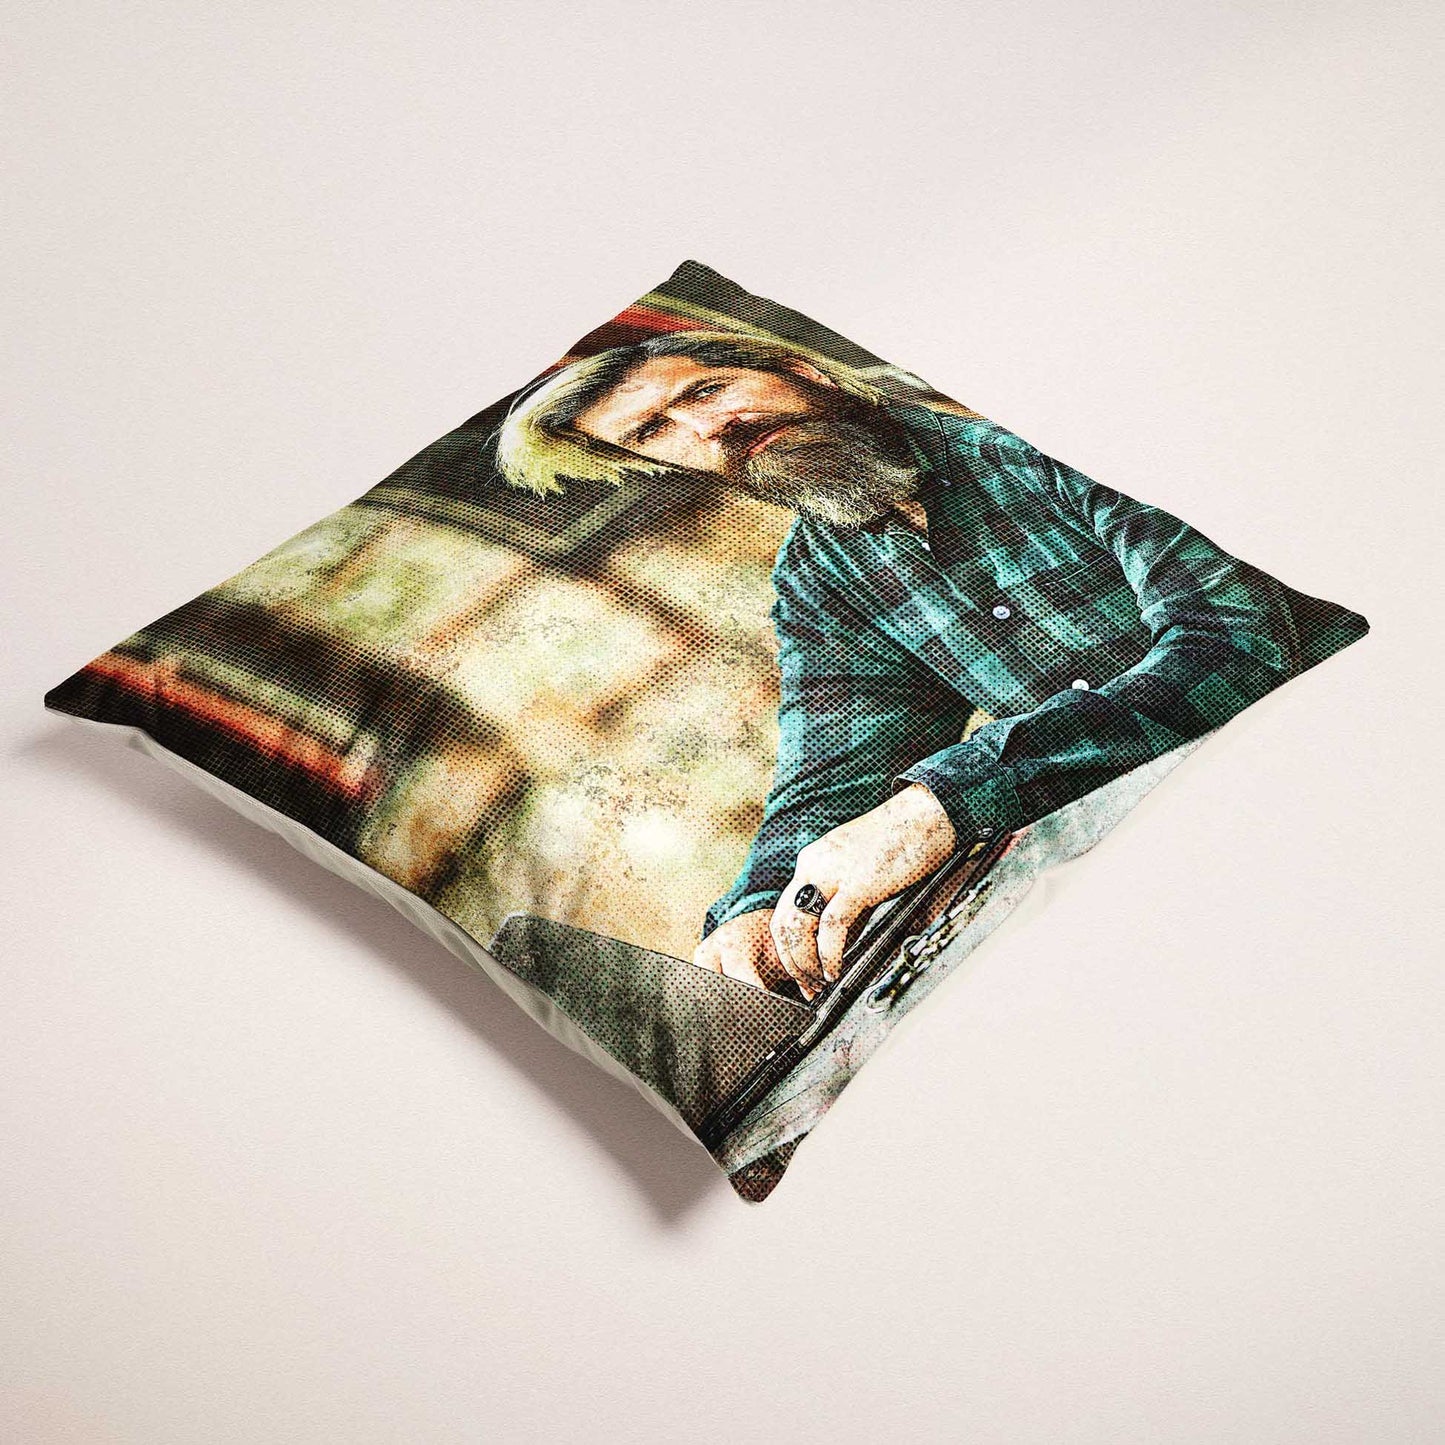 Experience the allure of artistic expression with the Personalised Grunge FX Cushion. Featuring a distressed print from your photo, this cushion captures a unique and creative vibe that appeals to art lovers. Handmade with soft velvet